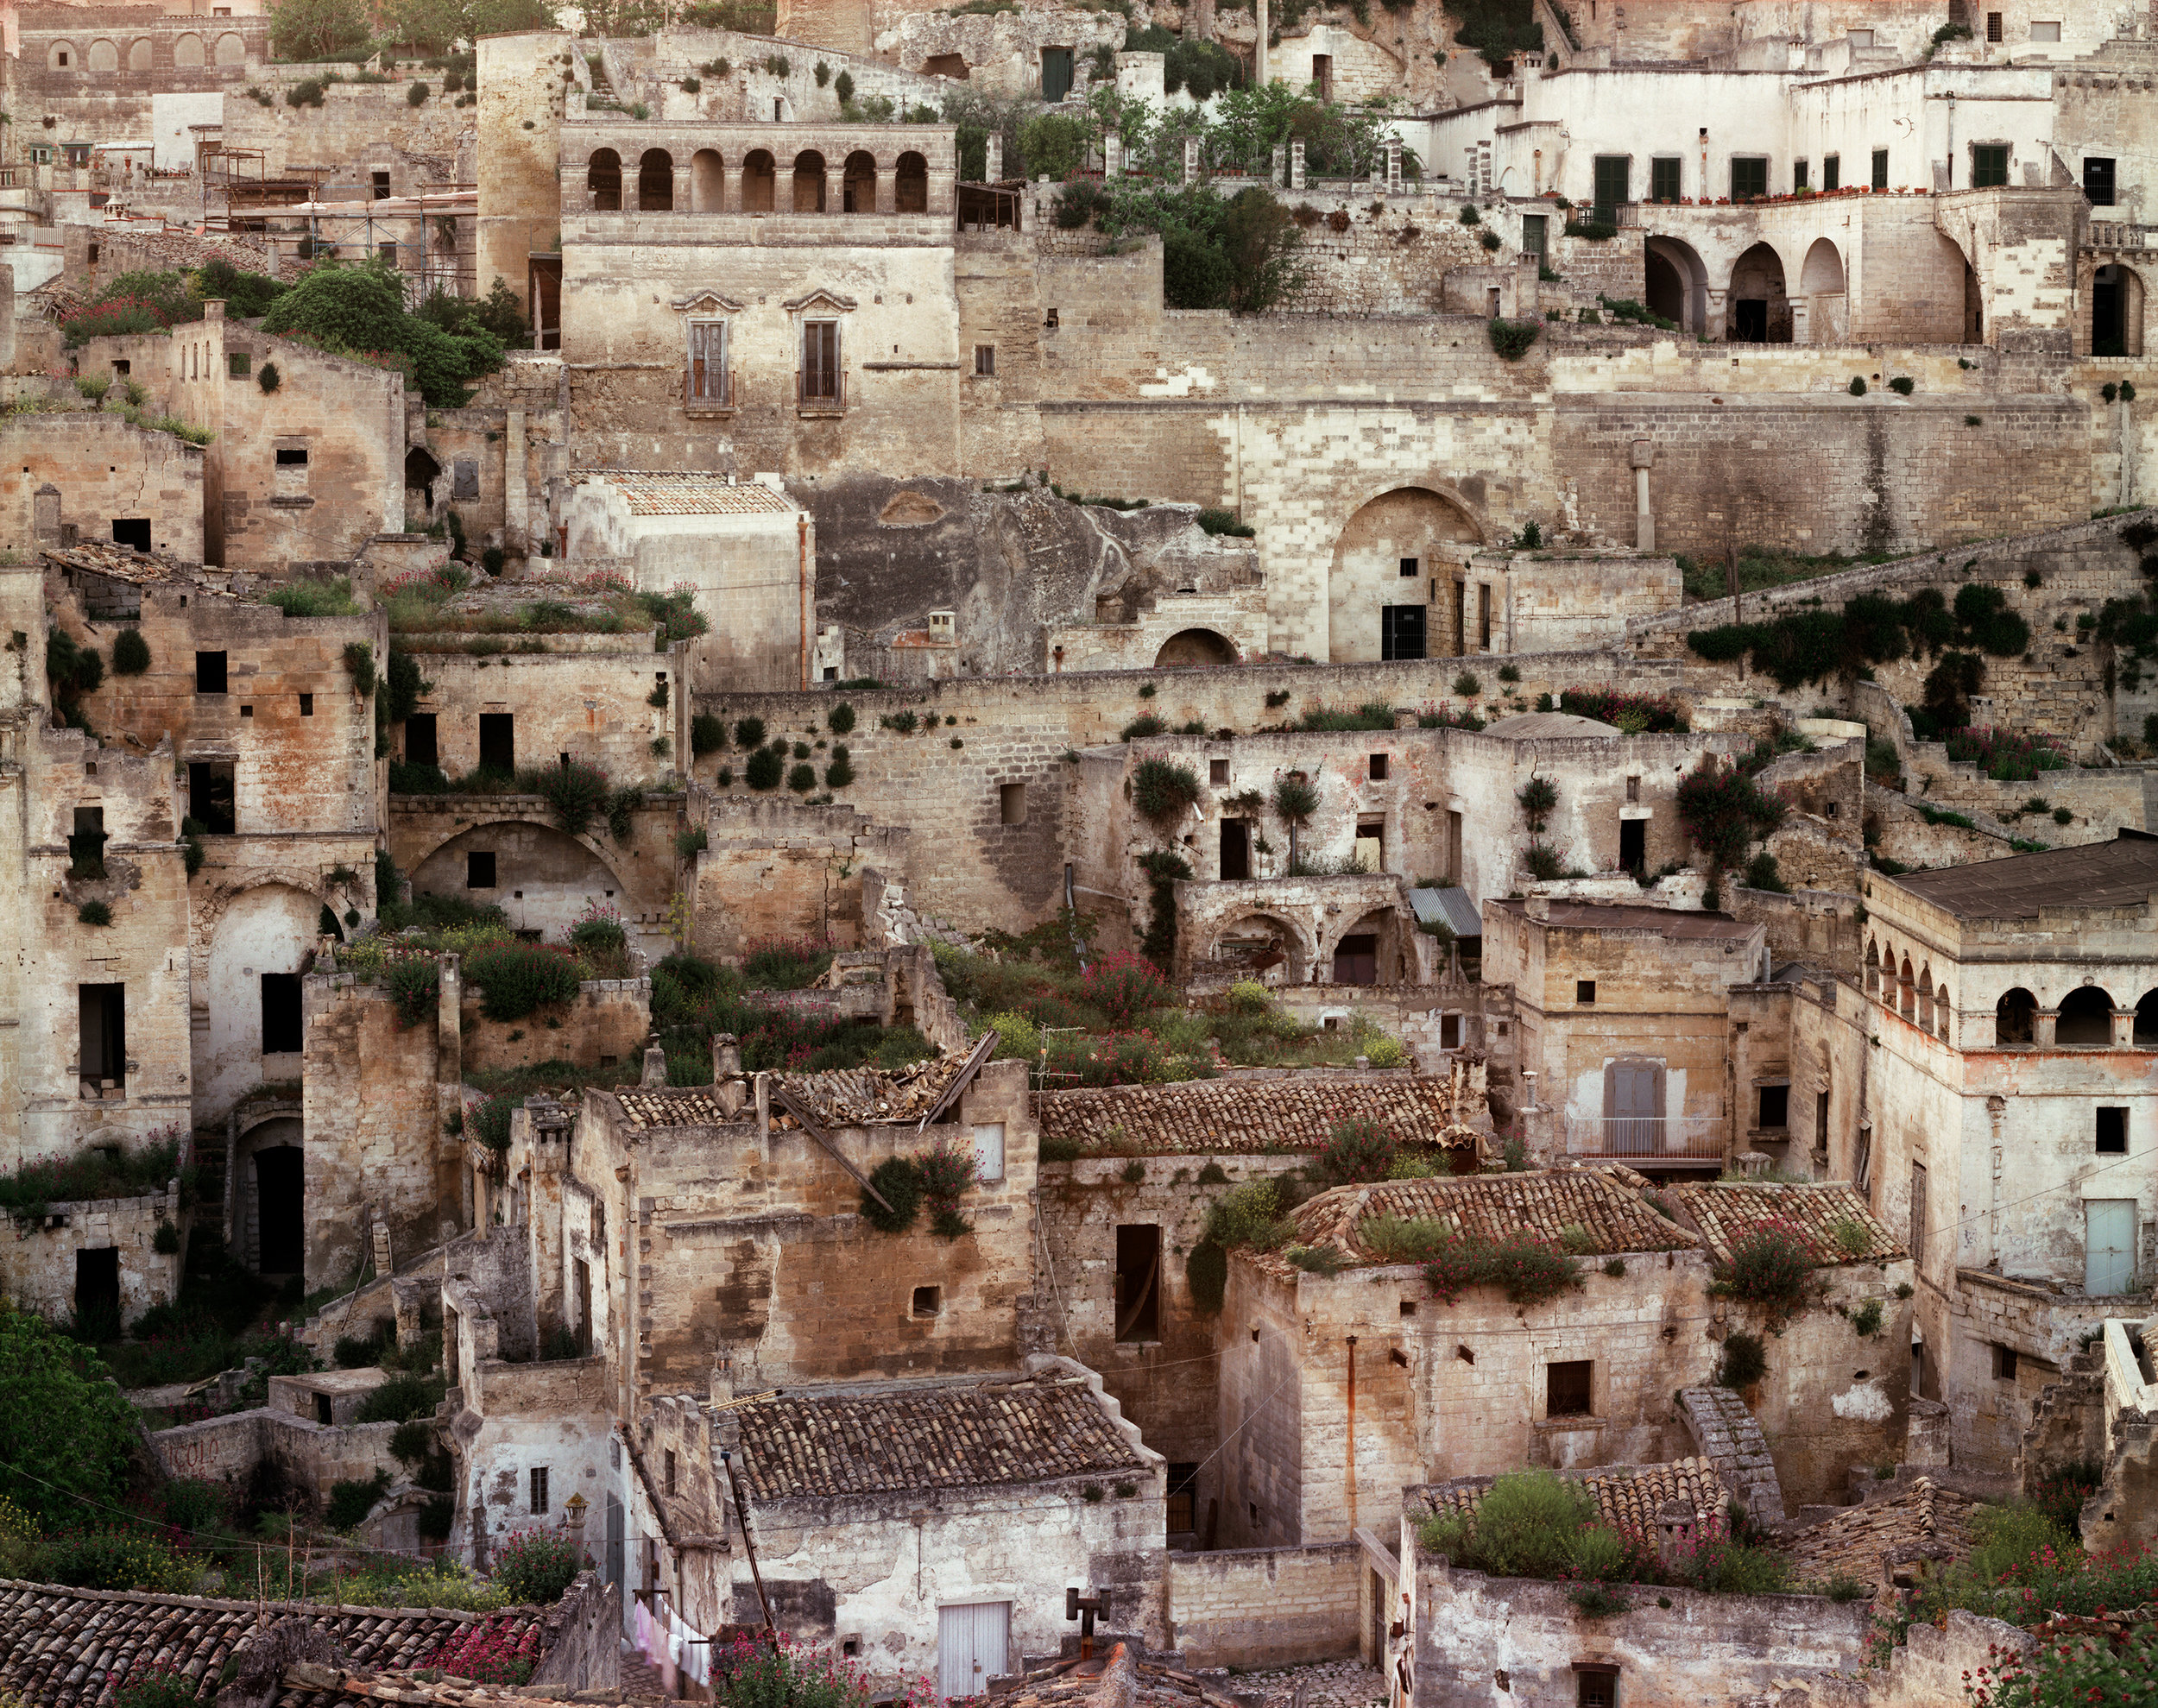  Caves used as dwellings since prehistoric times, modifies with tufa facades, now under restoration, Matera, Italy, 1994 